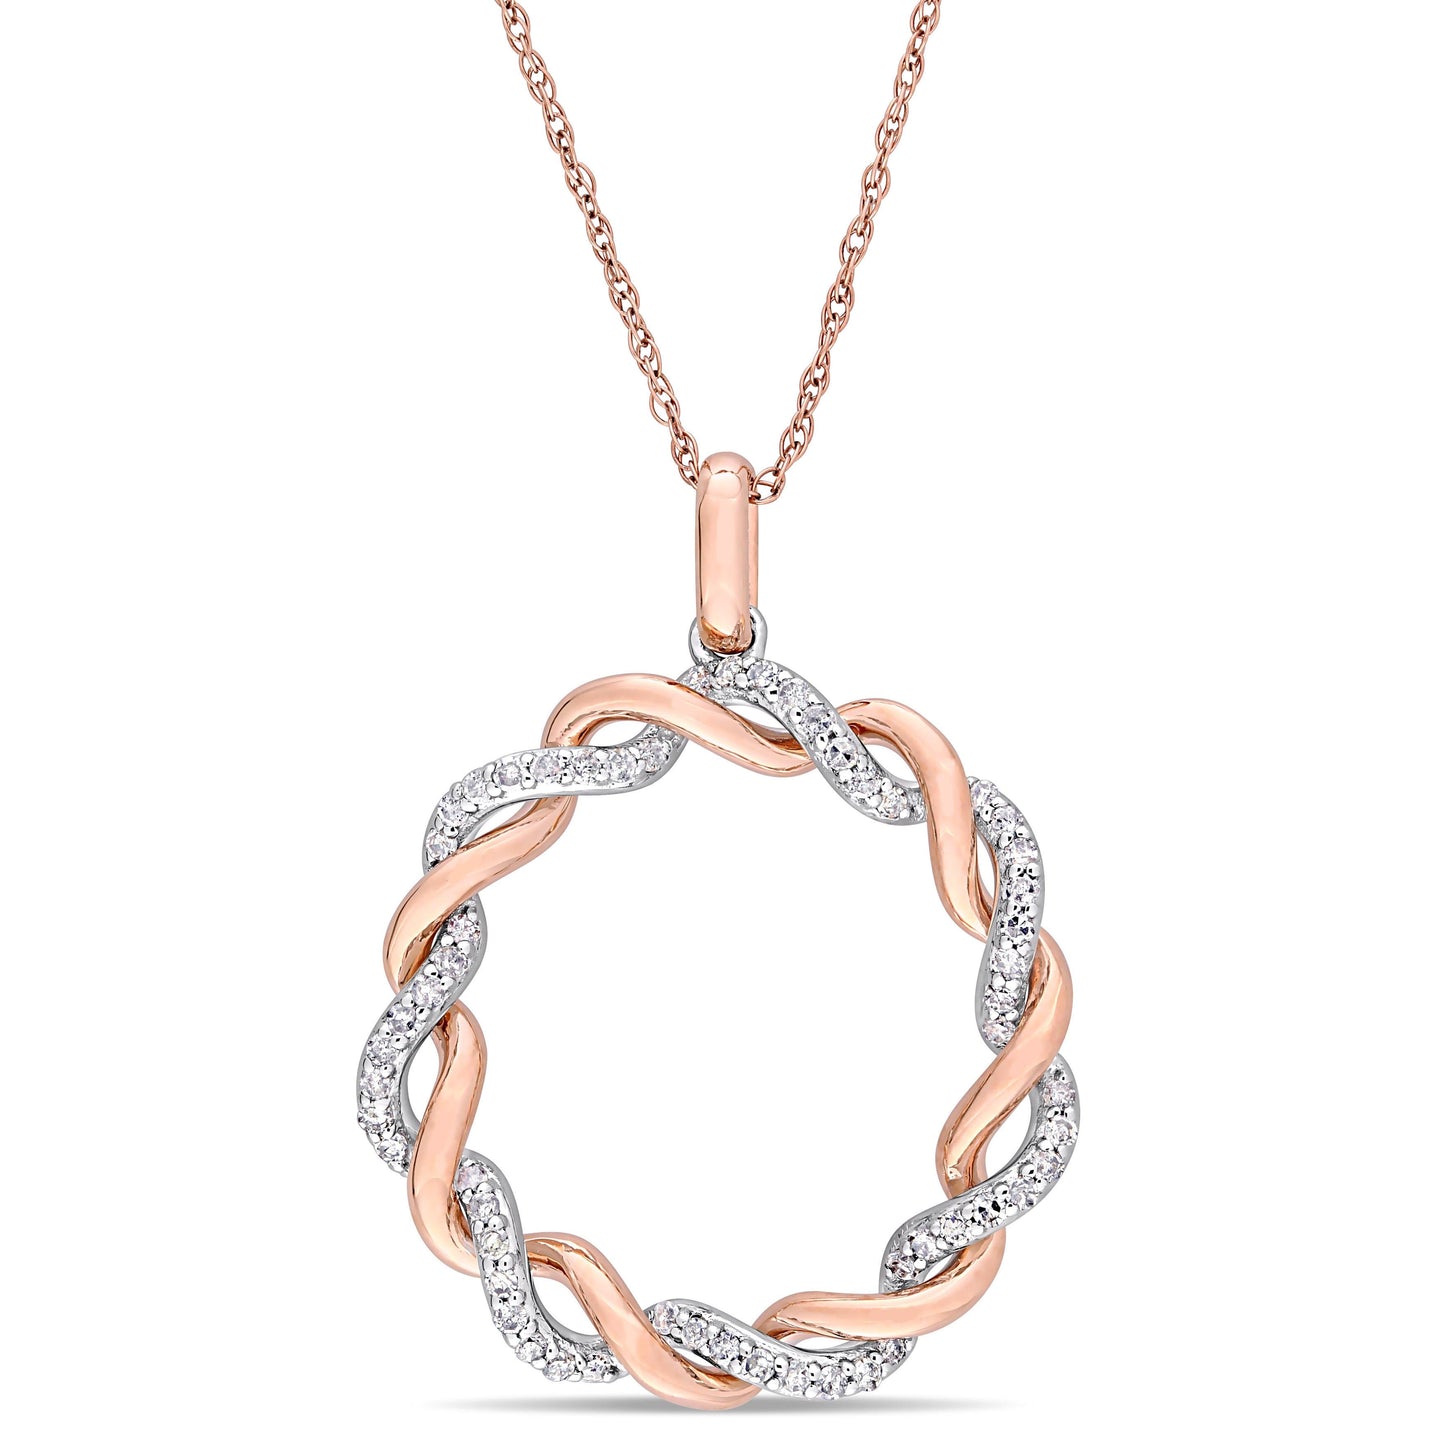 Julie Leah Diamond Twisted Circle Necklace in 2-Tone Gold